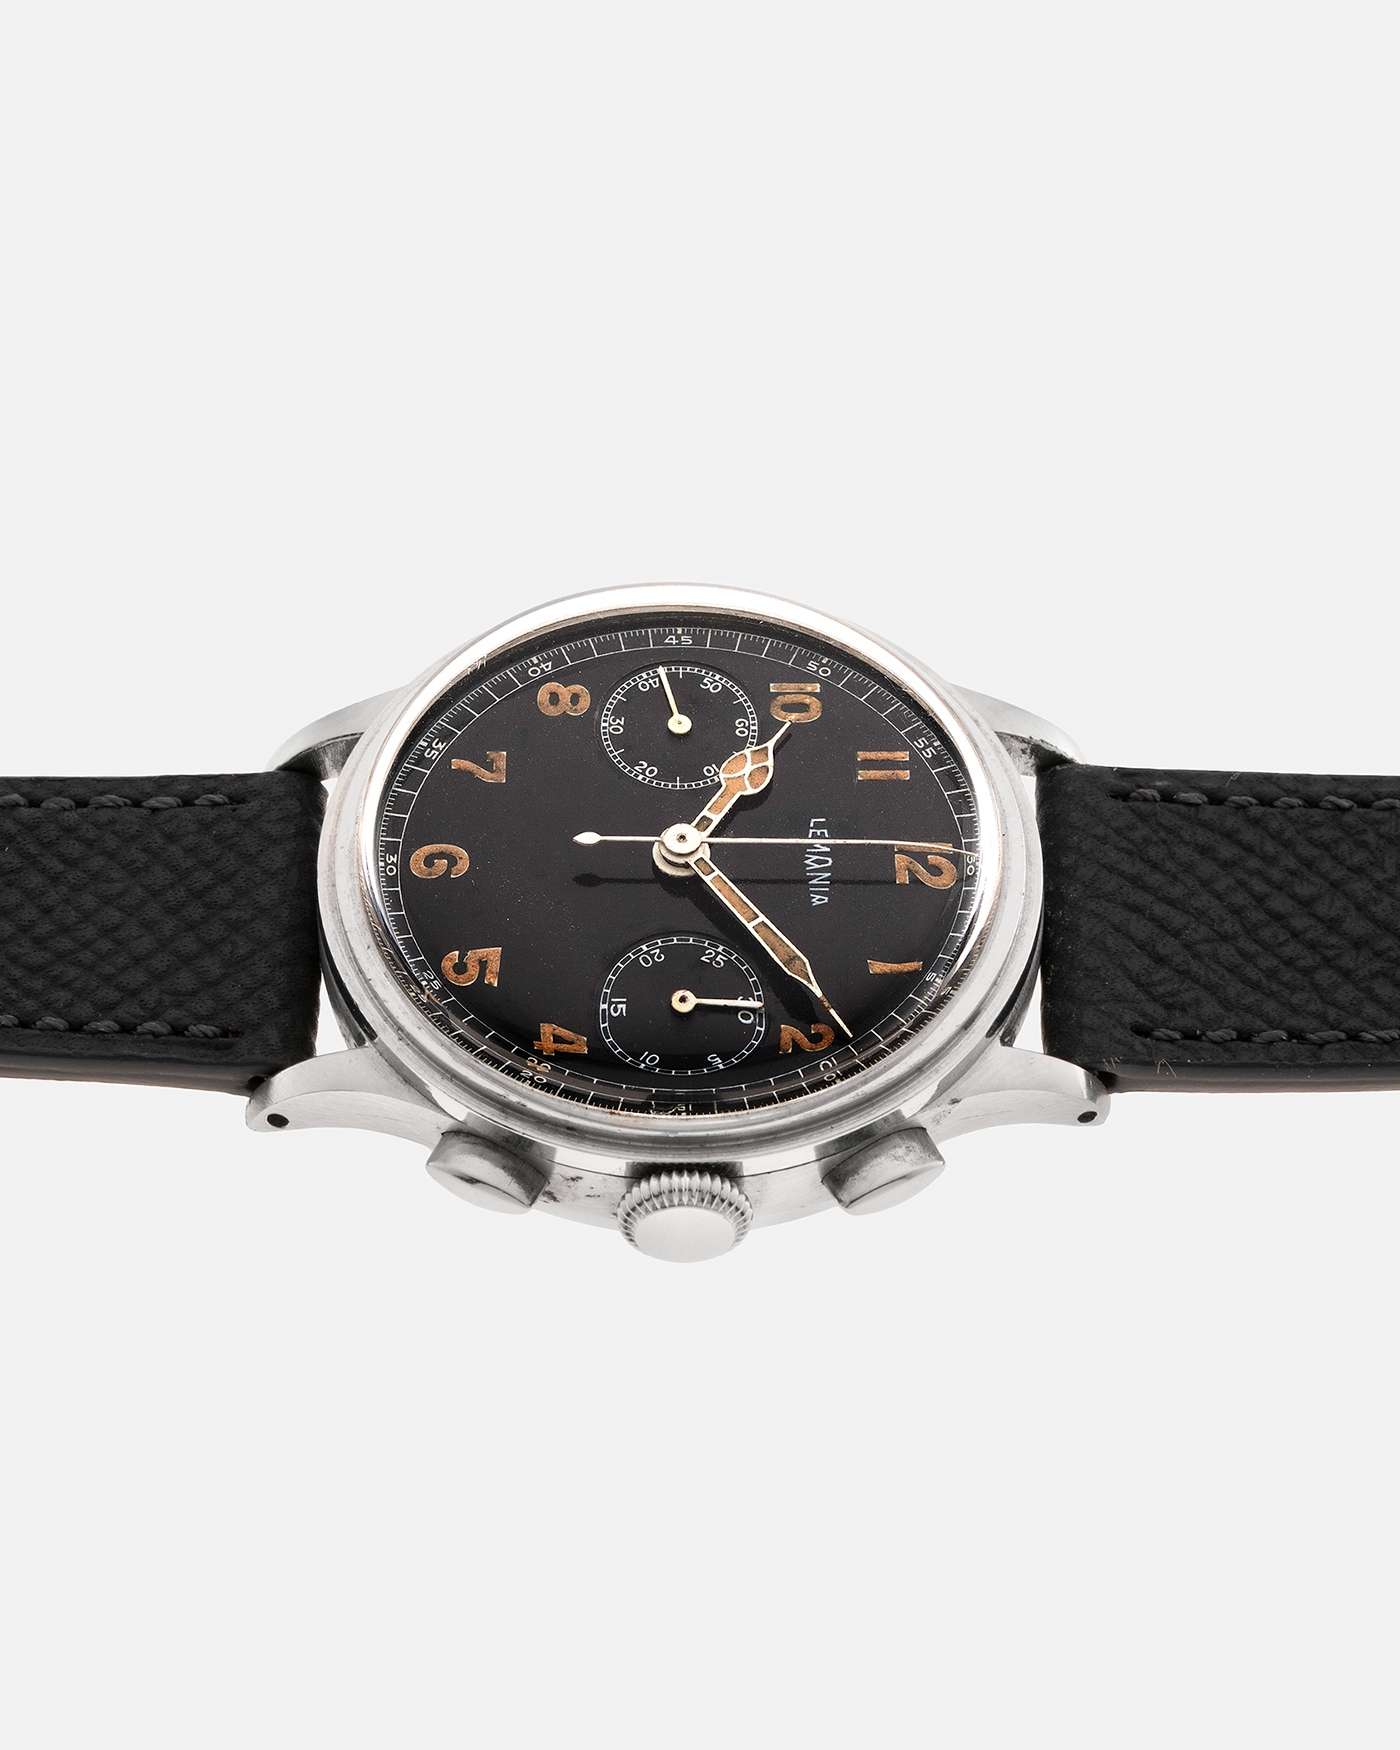 Brand: Lemania Year: 1940’s Model: 15TL Material: Stainless Steel Movement: Lemania Cal. 15TL, Manual-Winding Case Diameter: 38mm Strap: Molequin Anthracite Grey Textured Calf Leather Strap